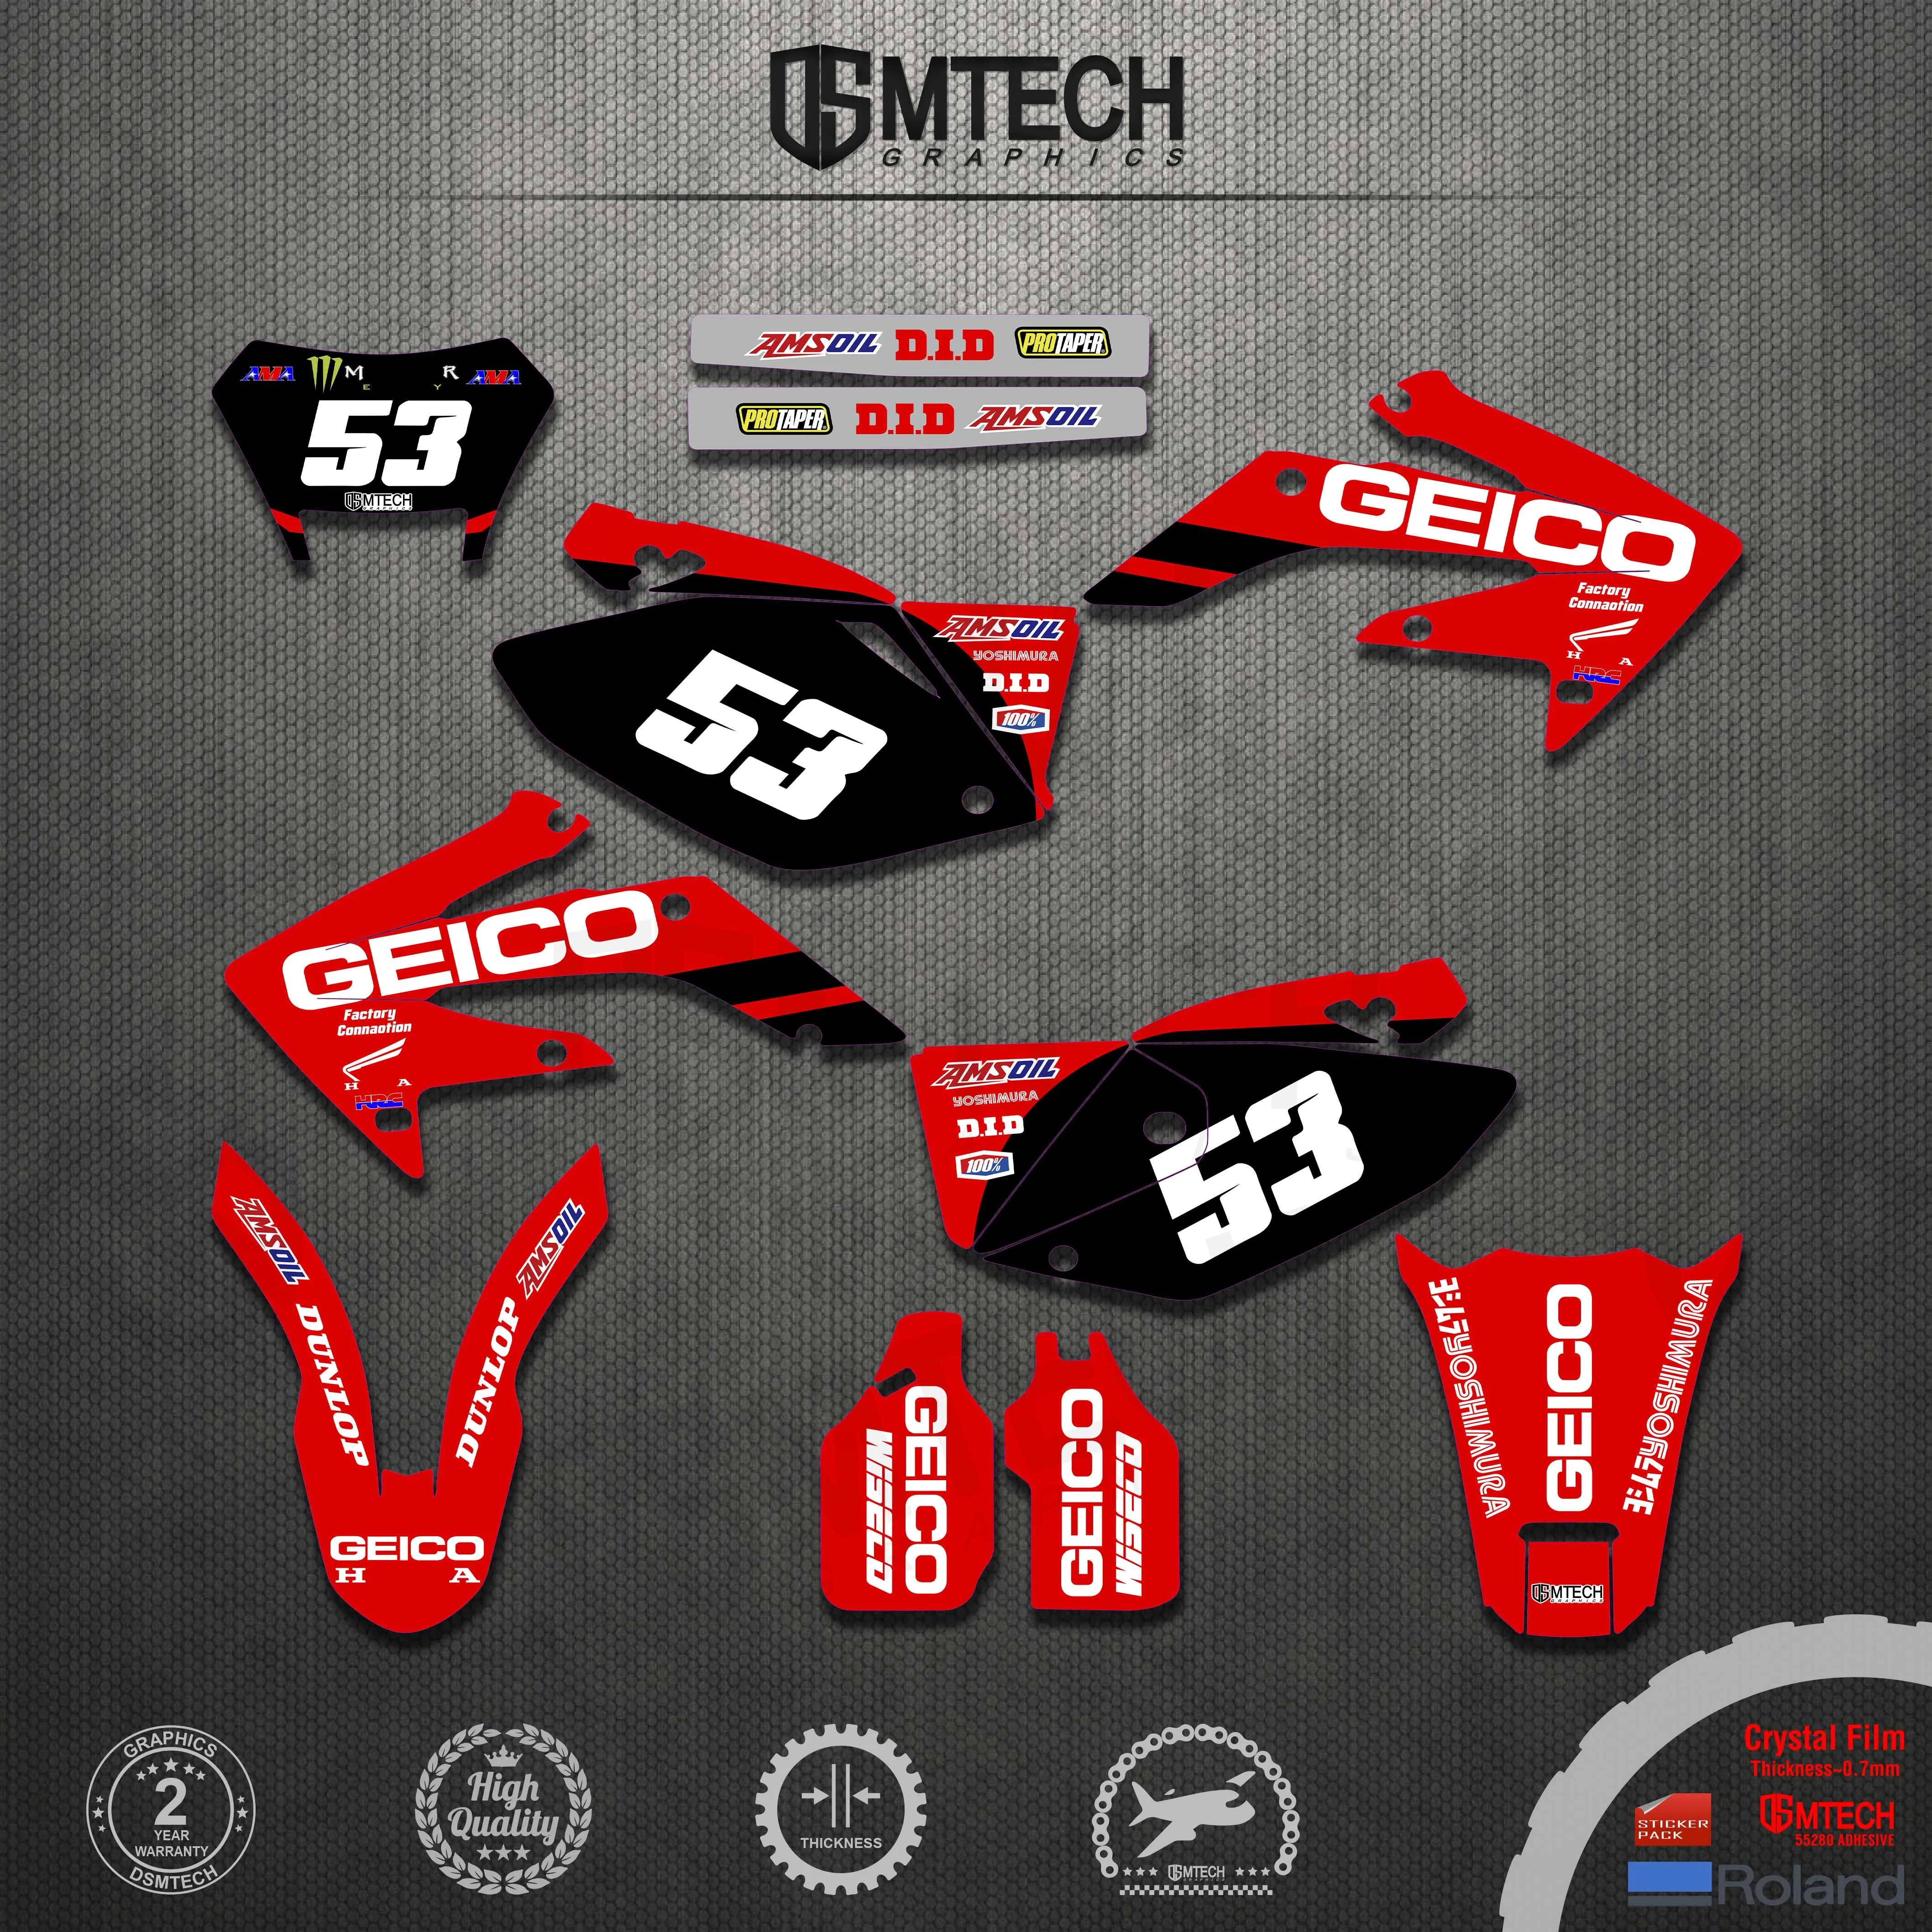 DSMTECH Decals Stickers Backgrounds Graphics Kits For HONDA 2004 2005 2006 2007 2008 2009 2010 2011 2012 2013 2014-2019 CRF250X